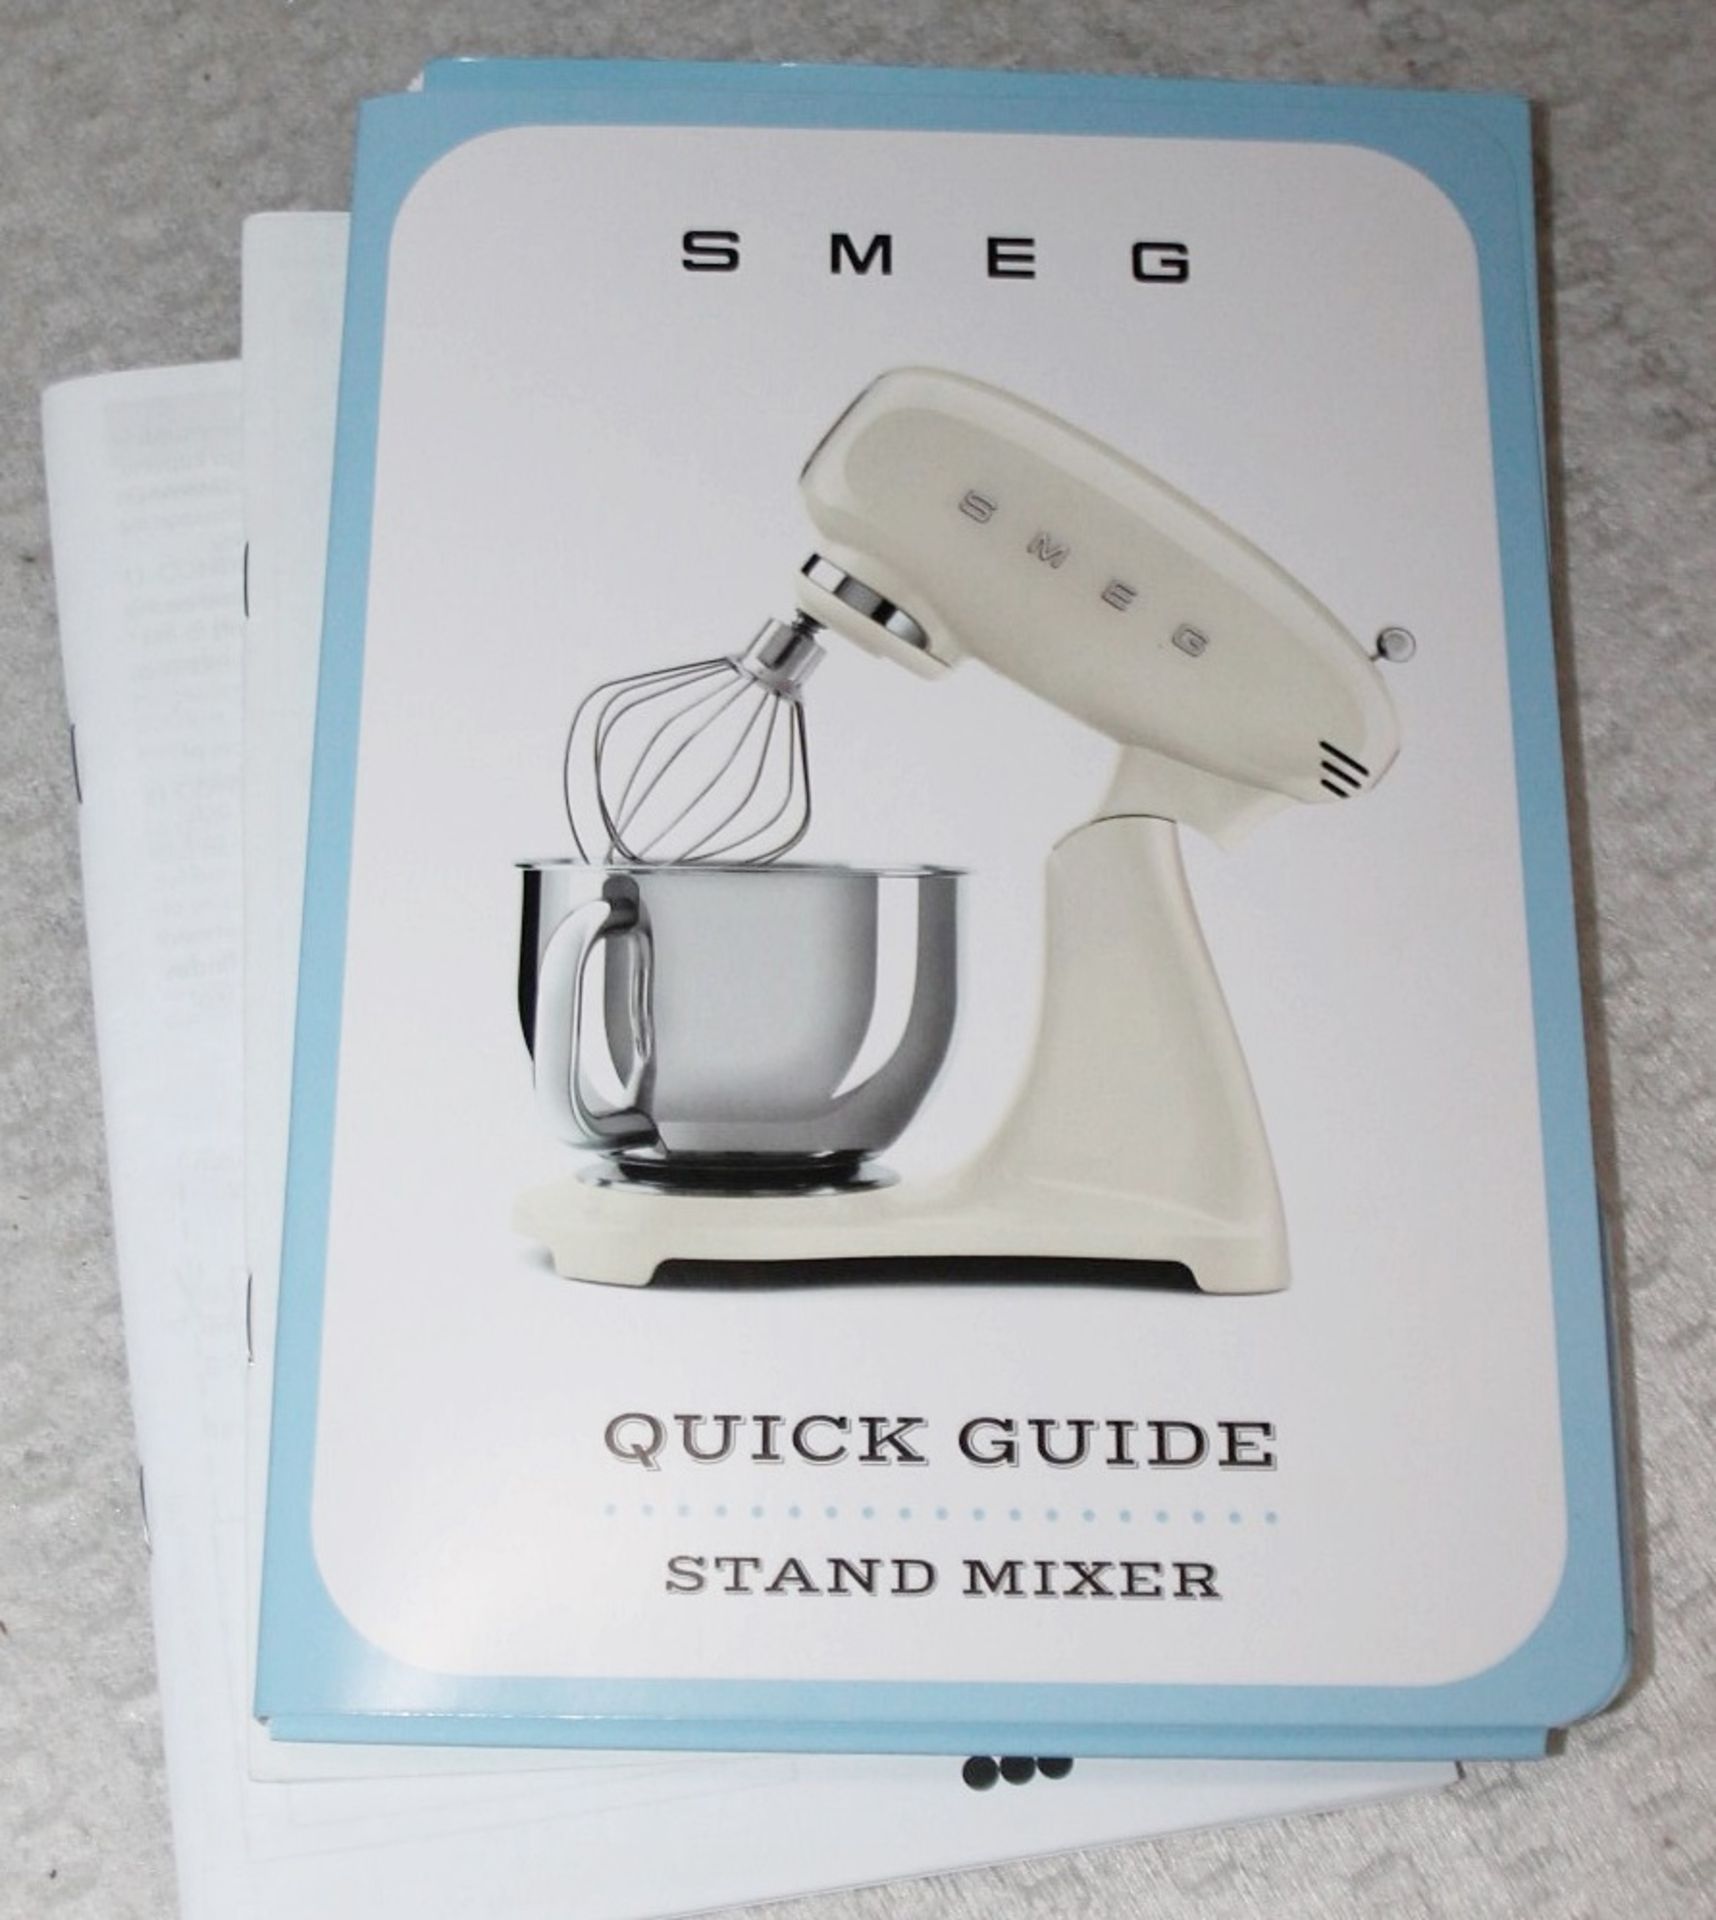 1 x SMEG 50'S Style Stand Mixer In Pale Blue (4.8L) Original Price £449.00 - Ex-Display - CL987 - - Image 8 of 14